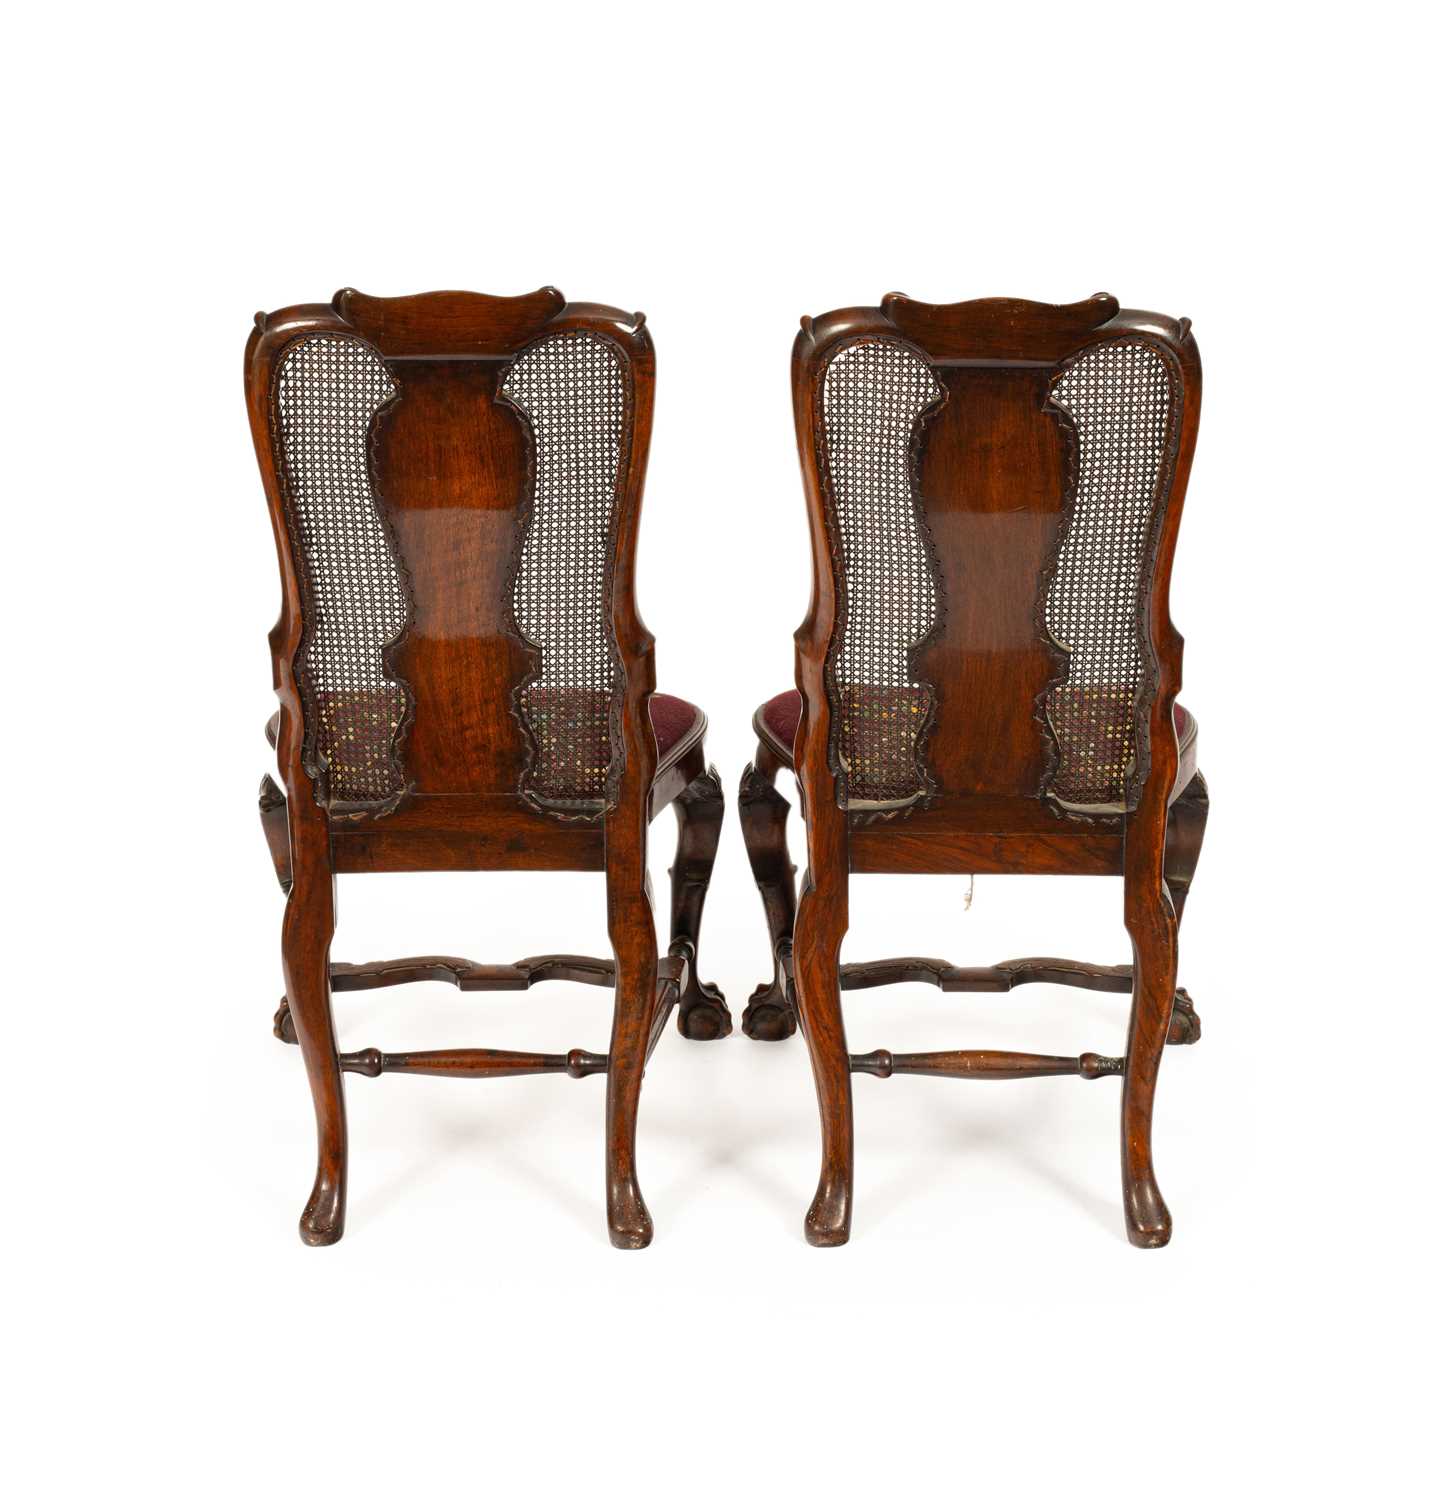 A pair of Dutch walnut dining chairs - Image 3 of 3